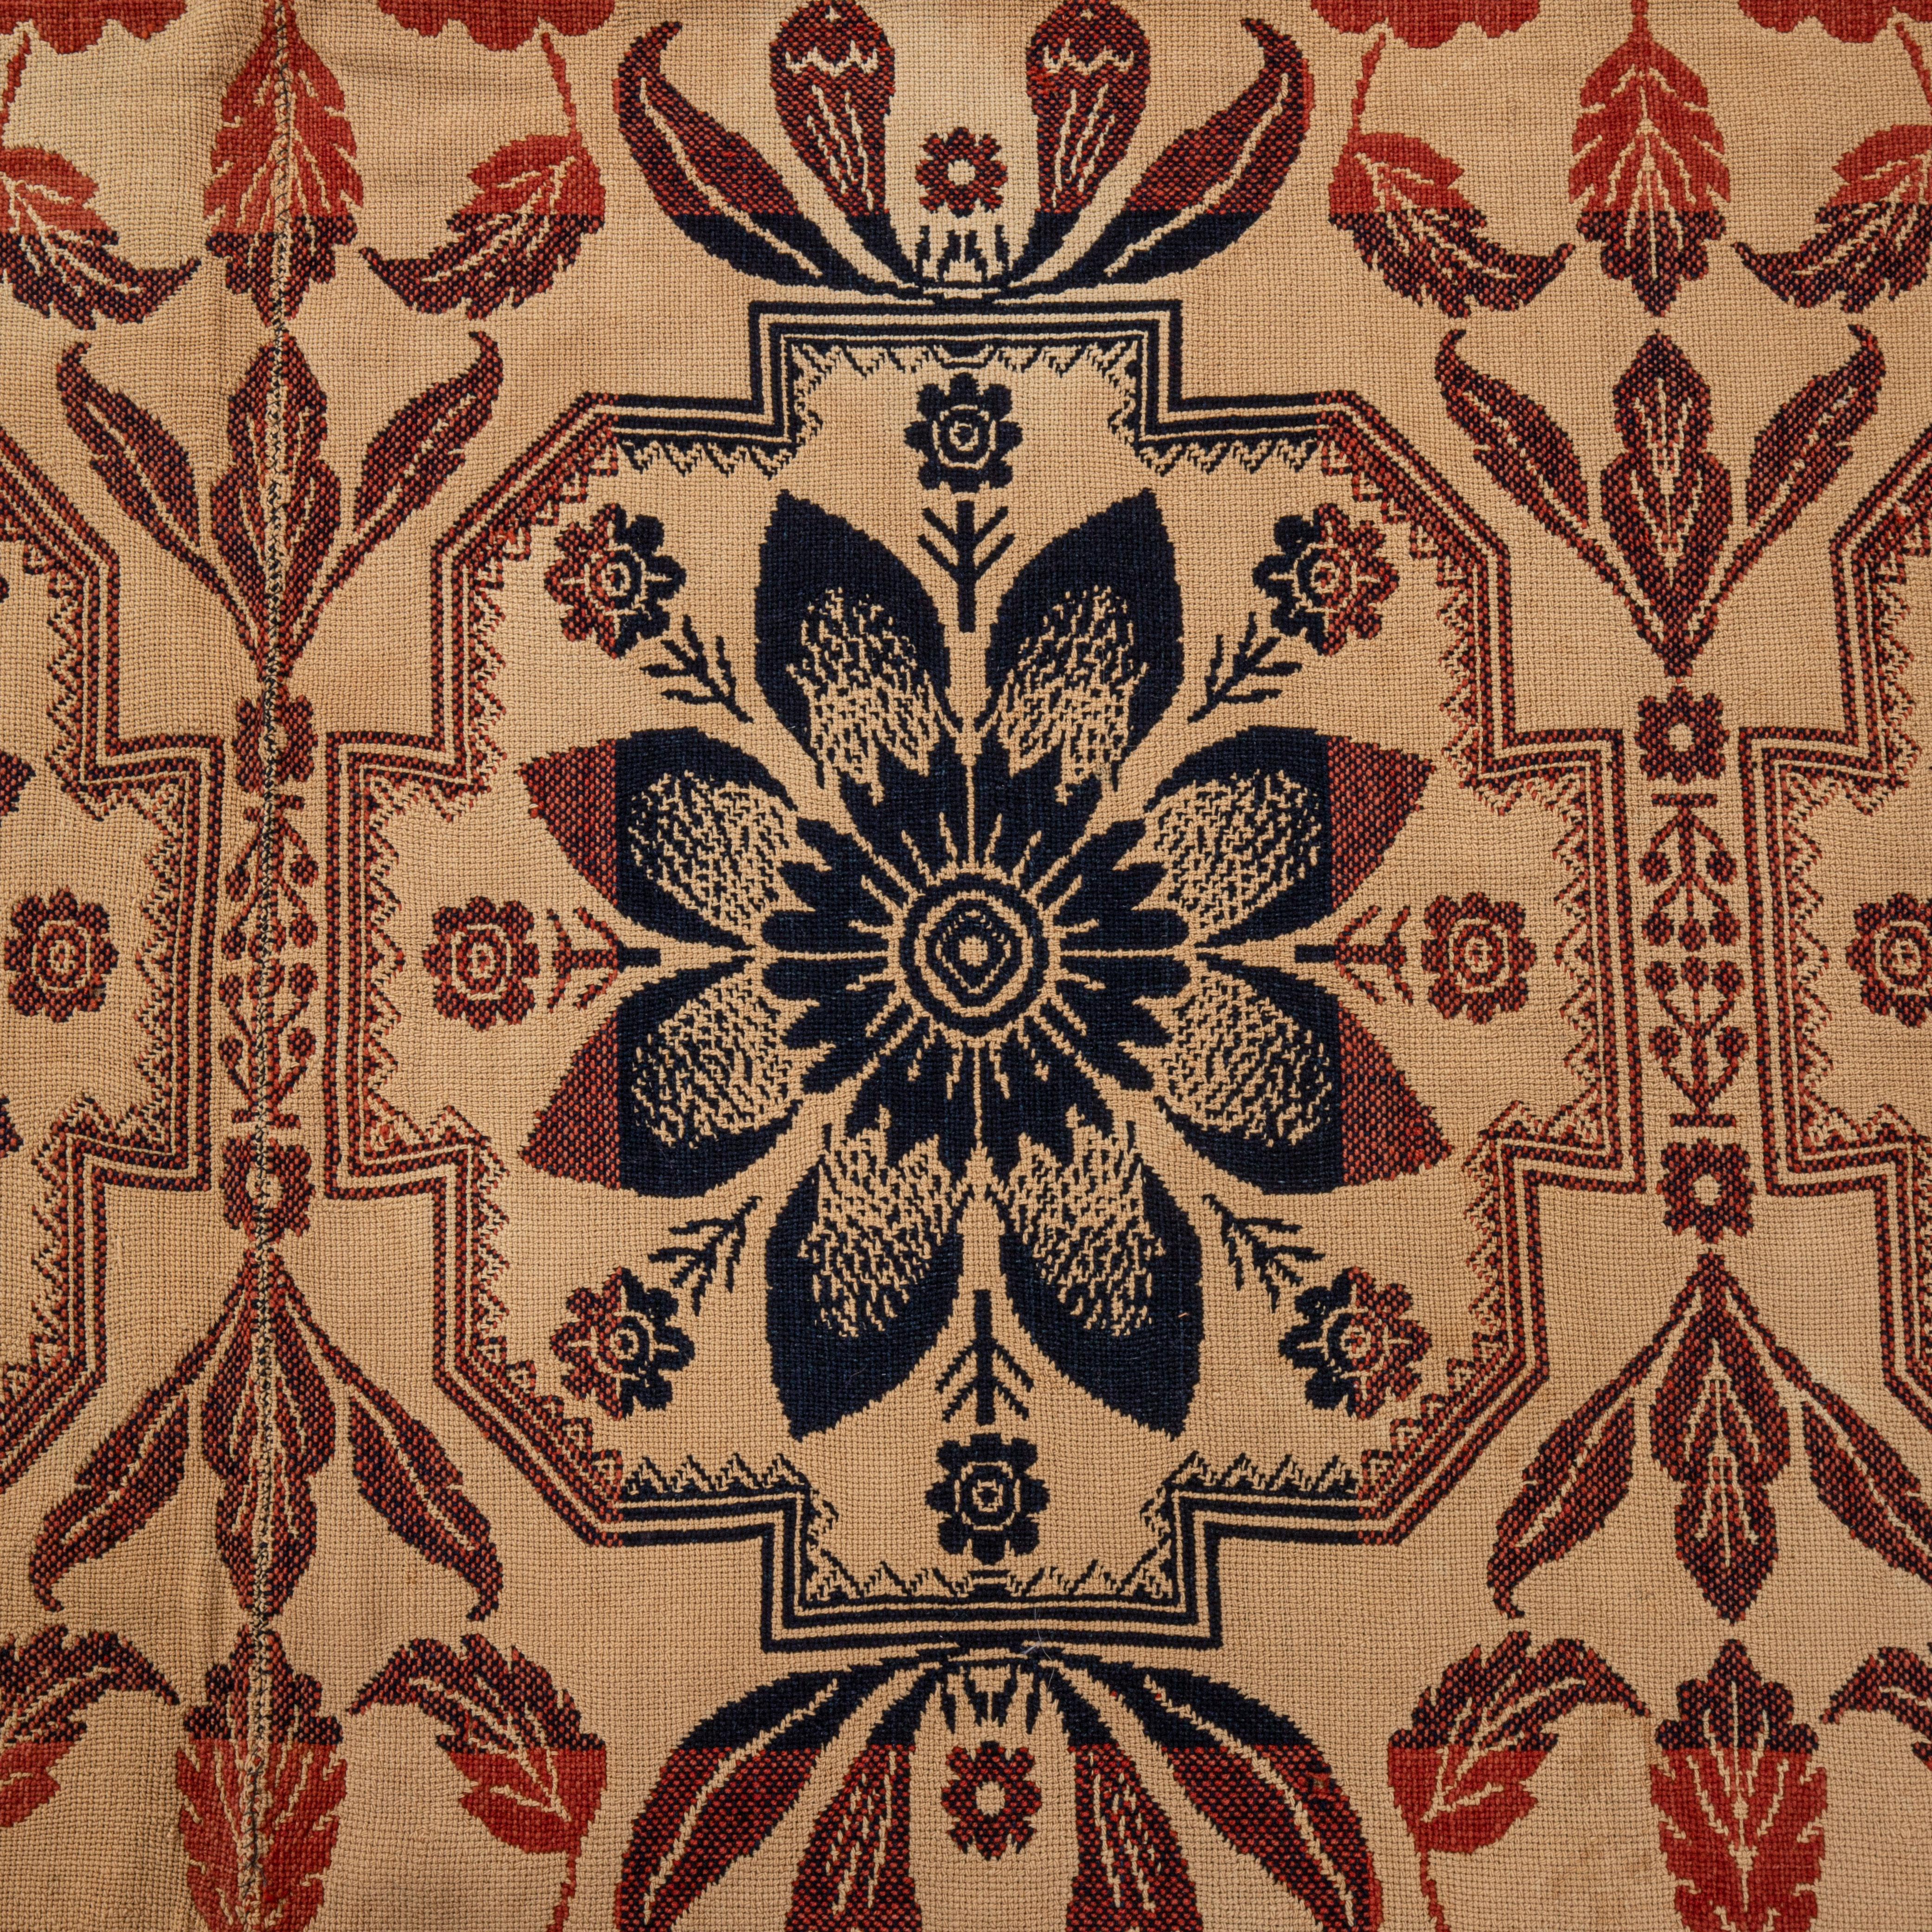 Jaquard Woven American Coverlet 19th C. For Sale 2